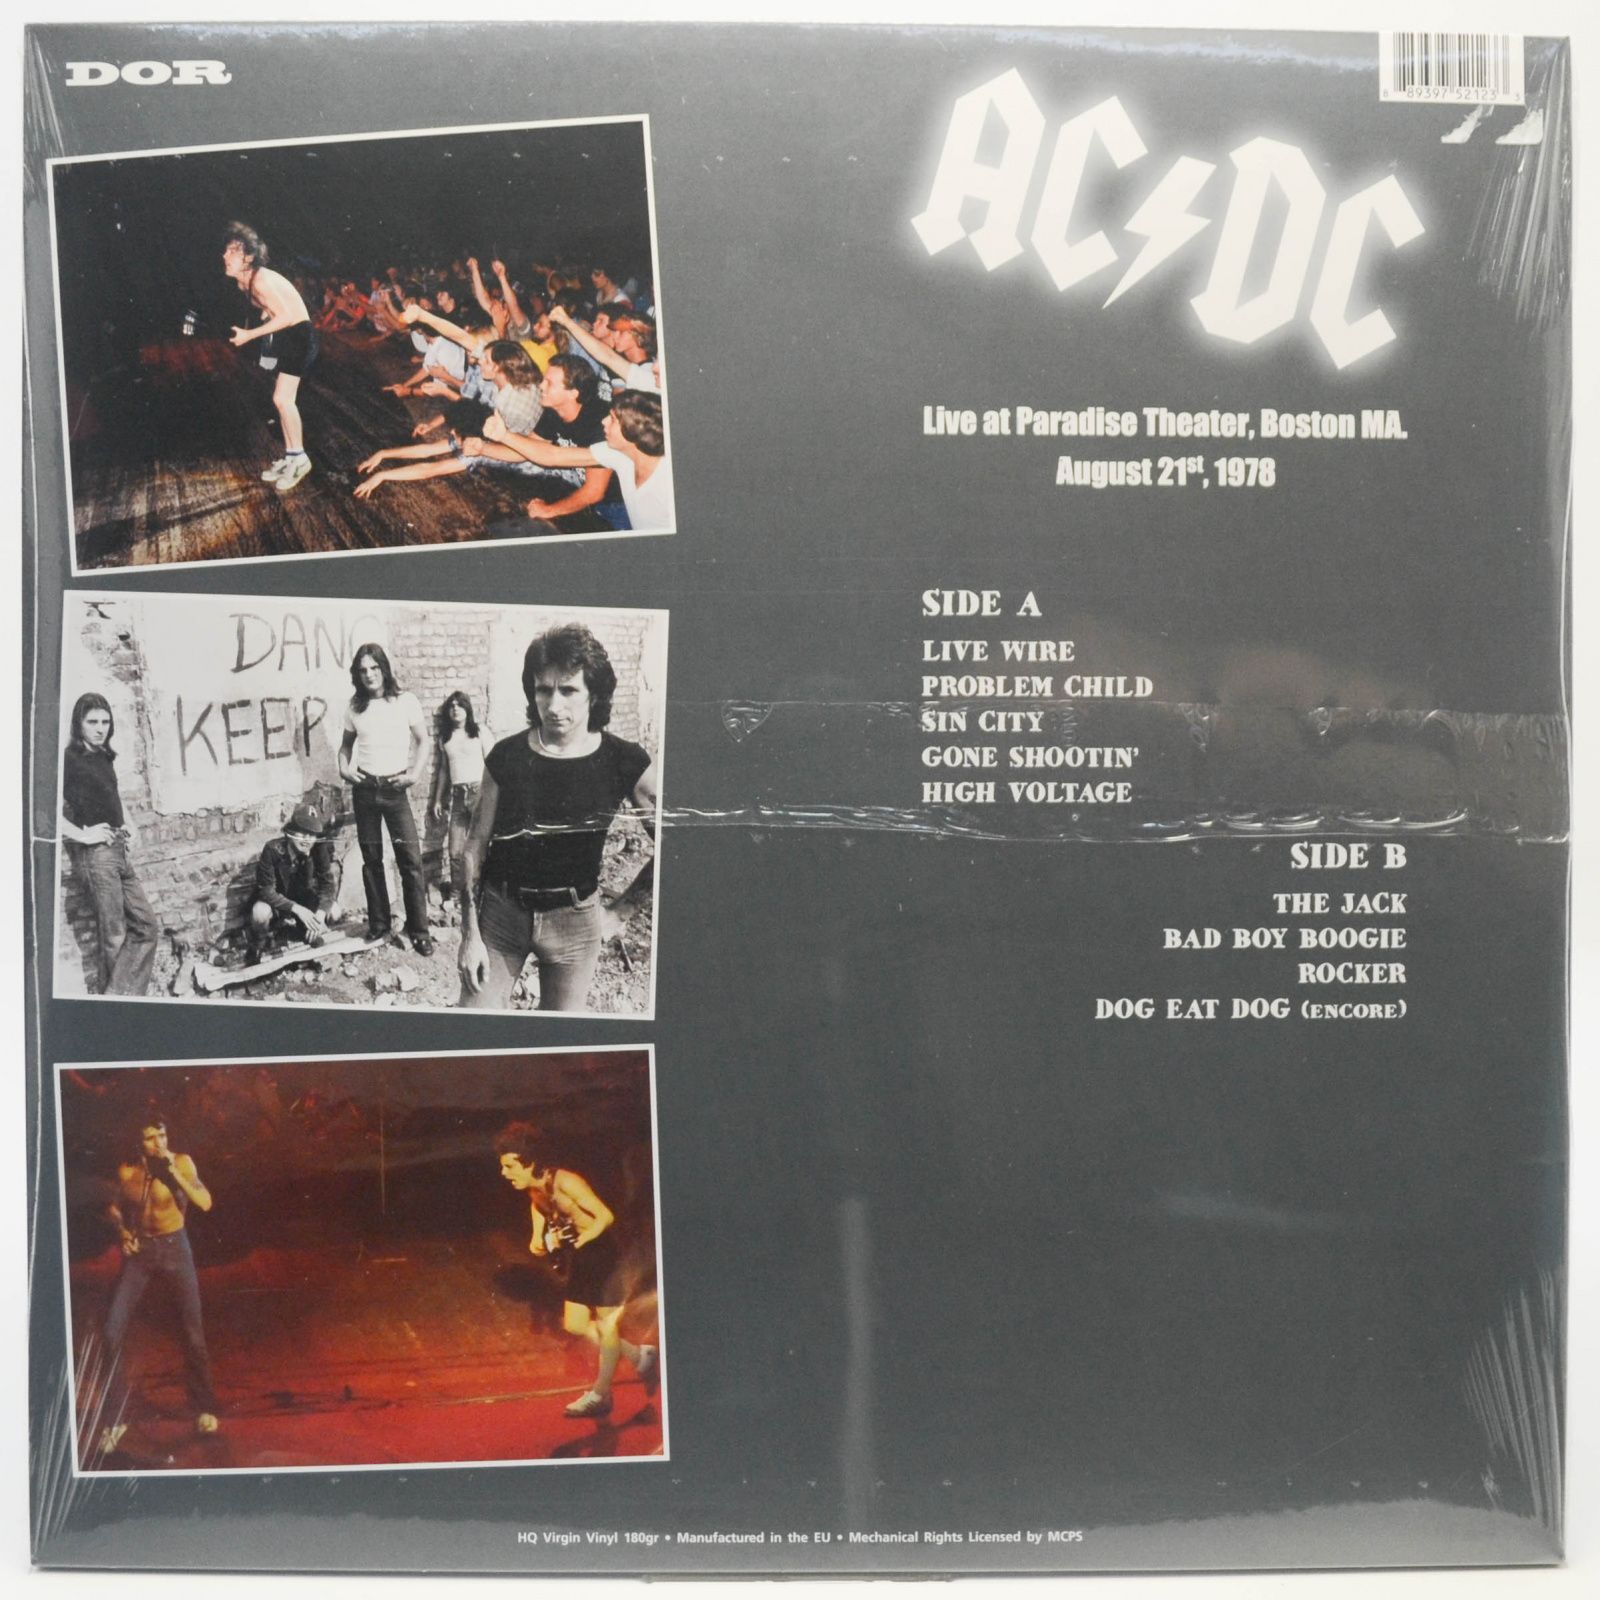 AC/DC — AC/DC Live at Paradise Theater, Boston MA. August 21st, 1978, 1982